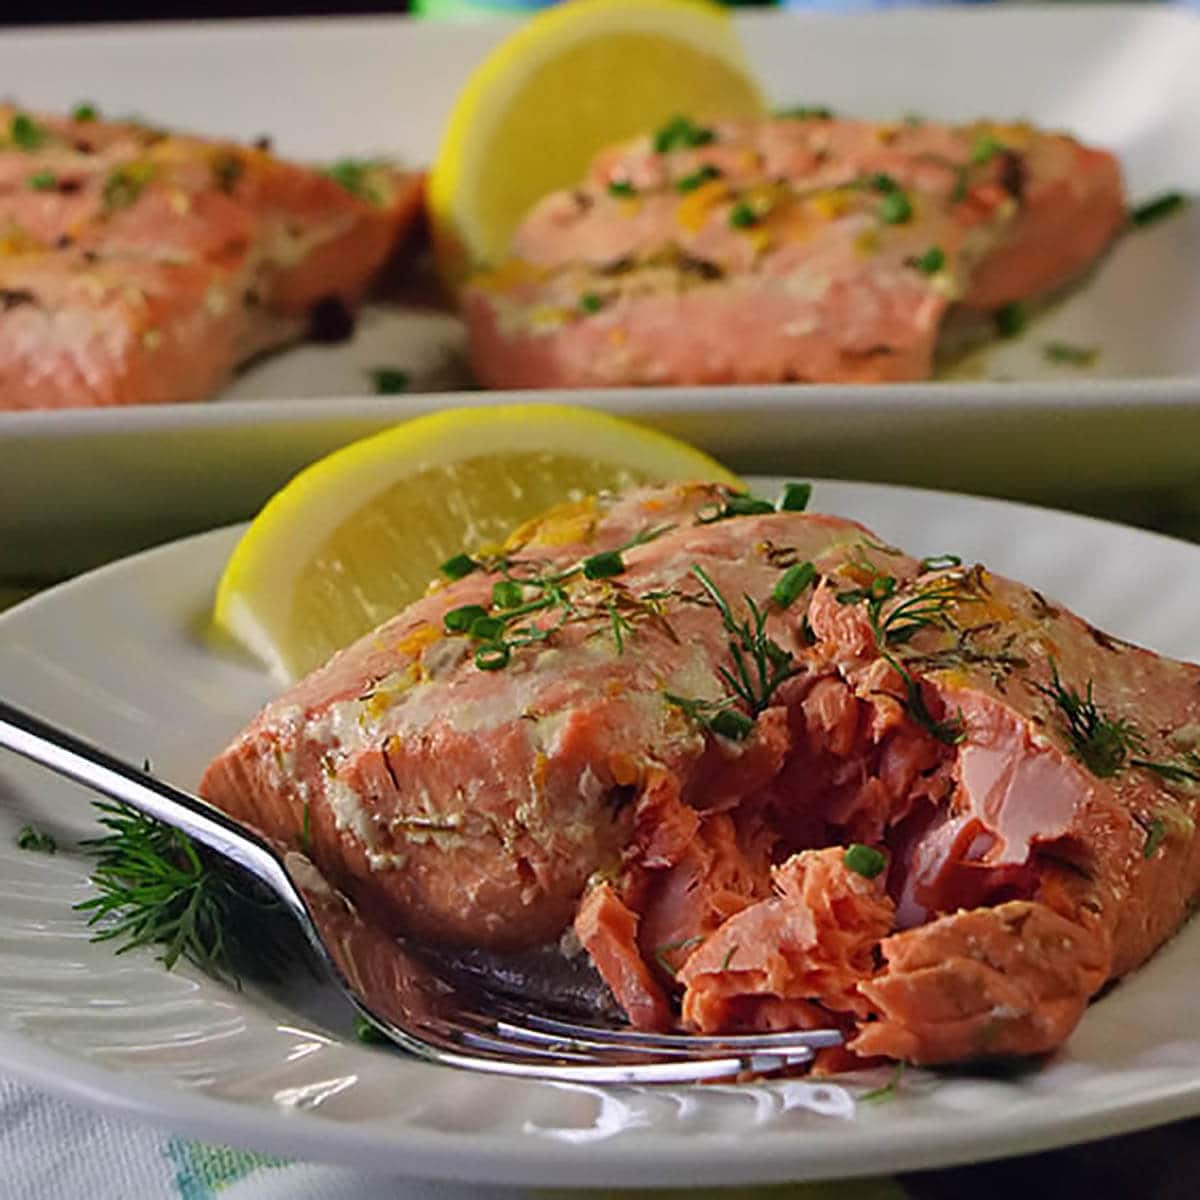 Poached salmon with lemon on a plate.